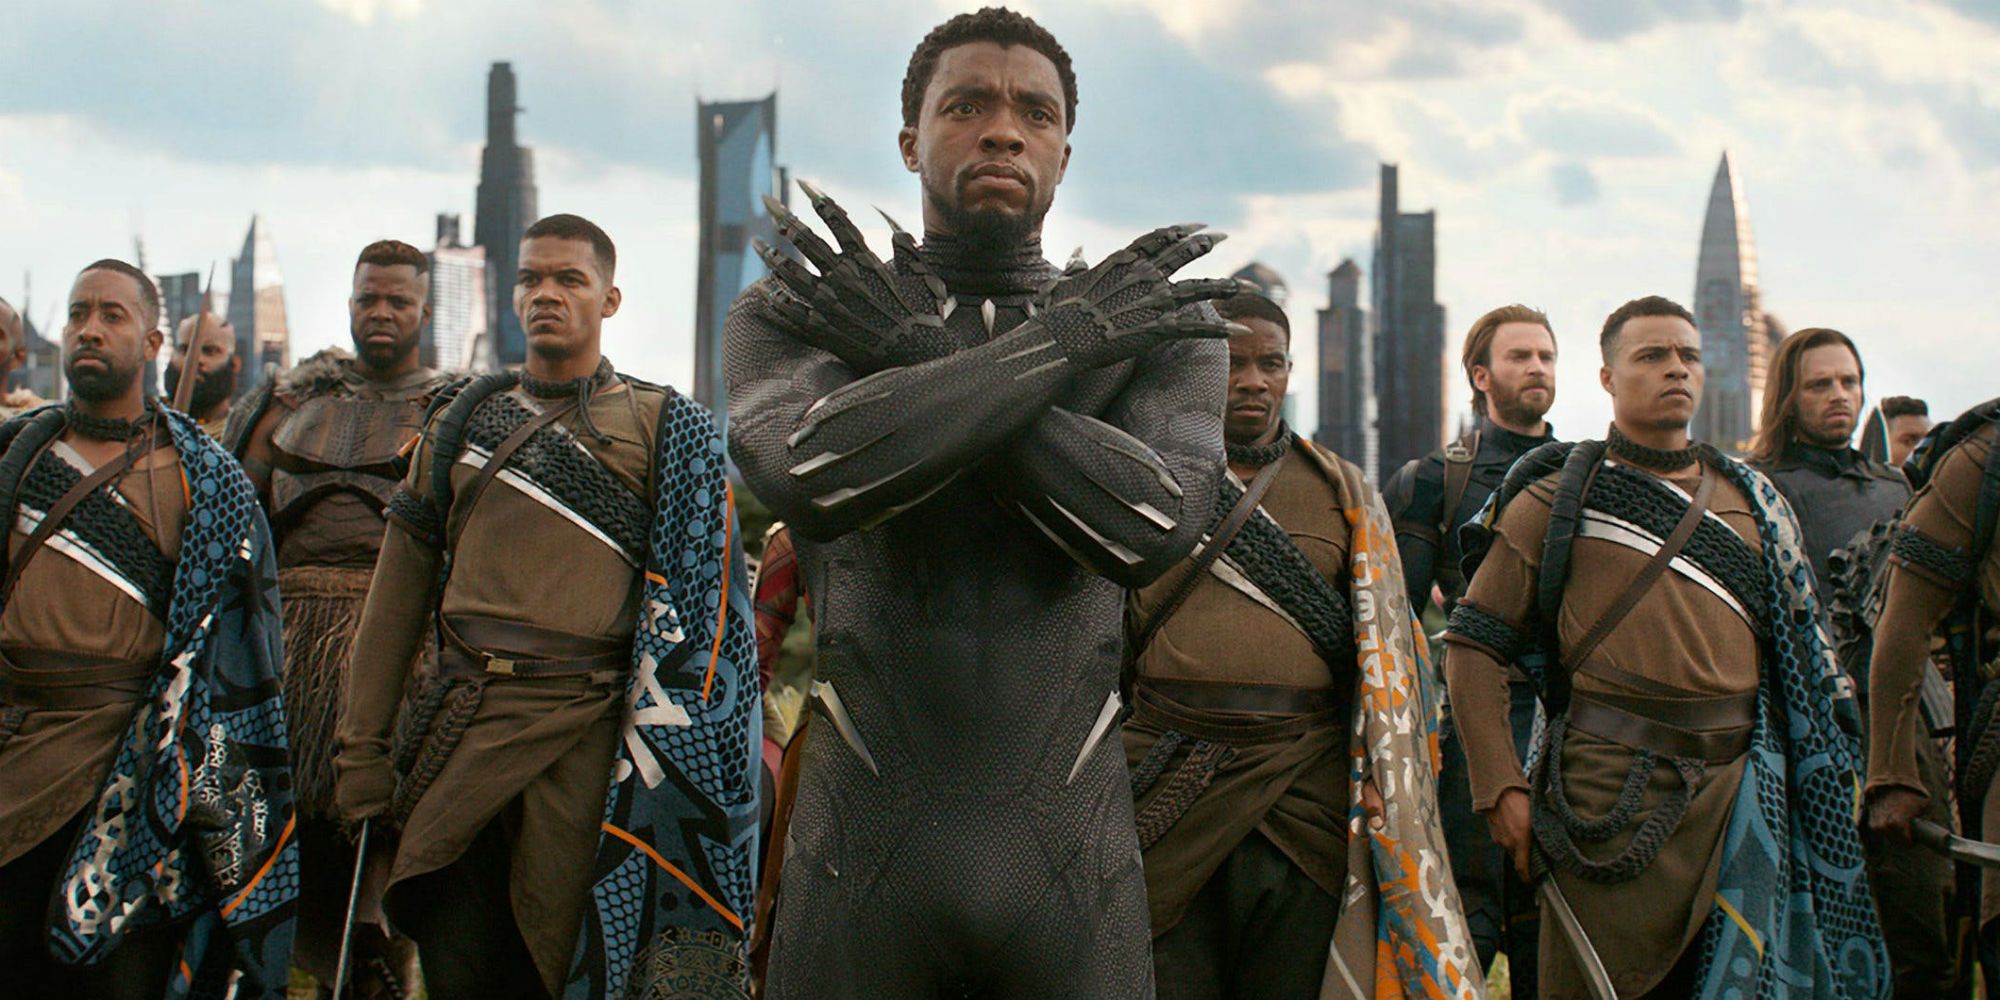 T'Challa and the Avengers prepare for battle in Avengers Infinity War